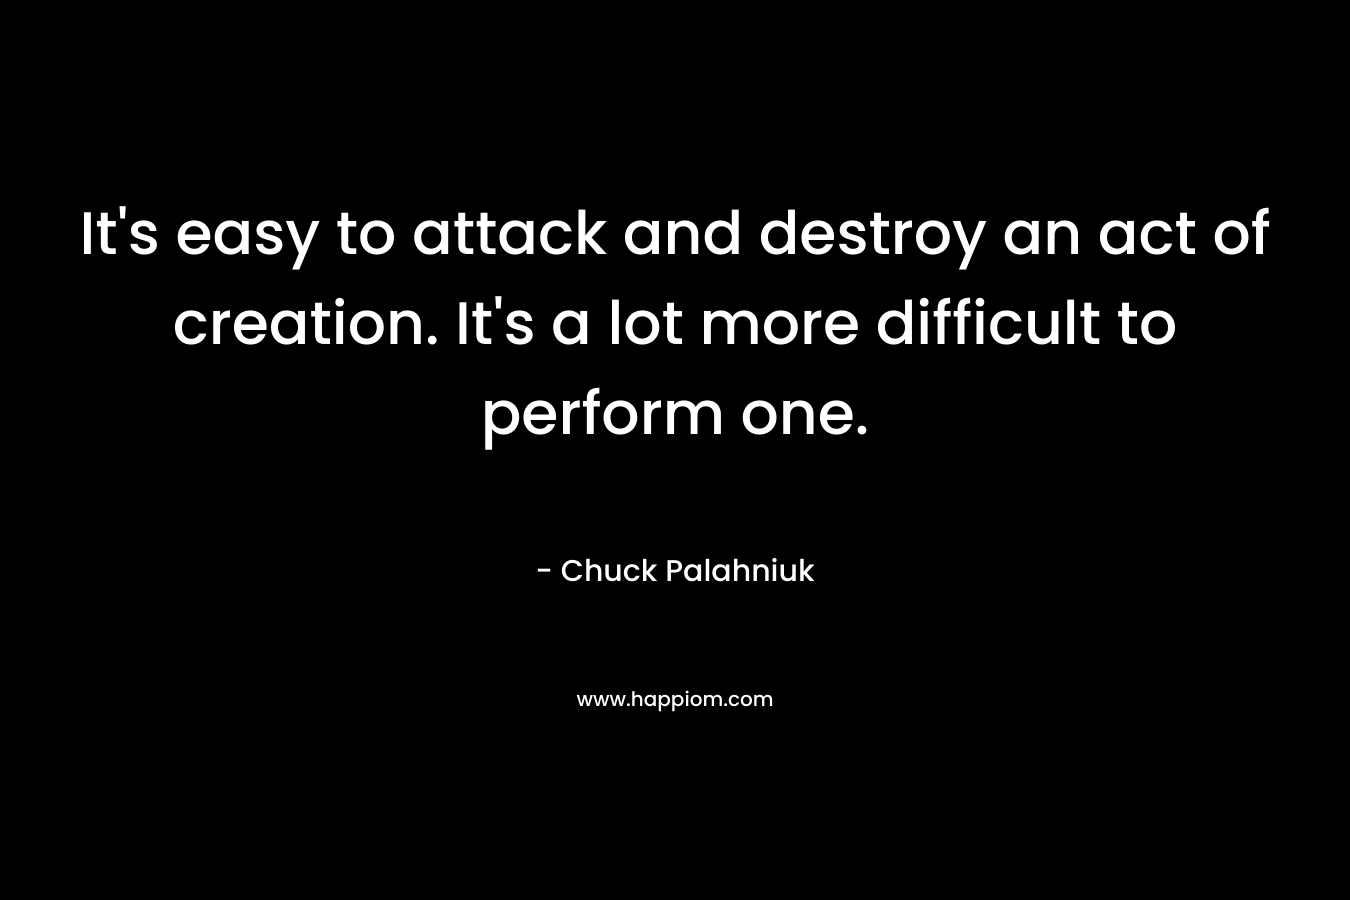 It's easy to attack and destroy an act of creation. It's a lot more difficult to perform one.